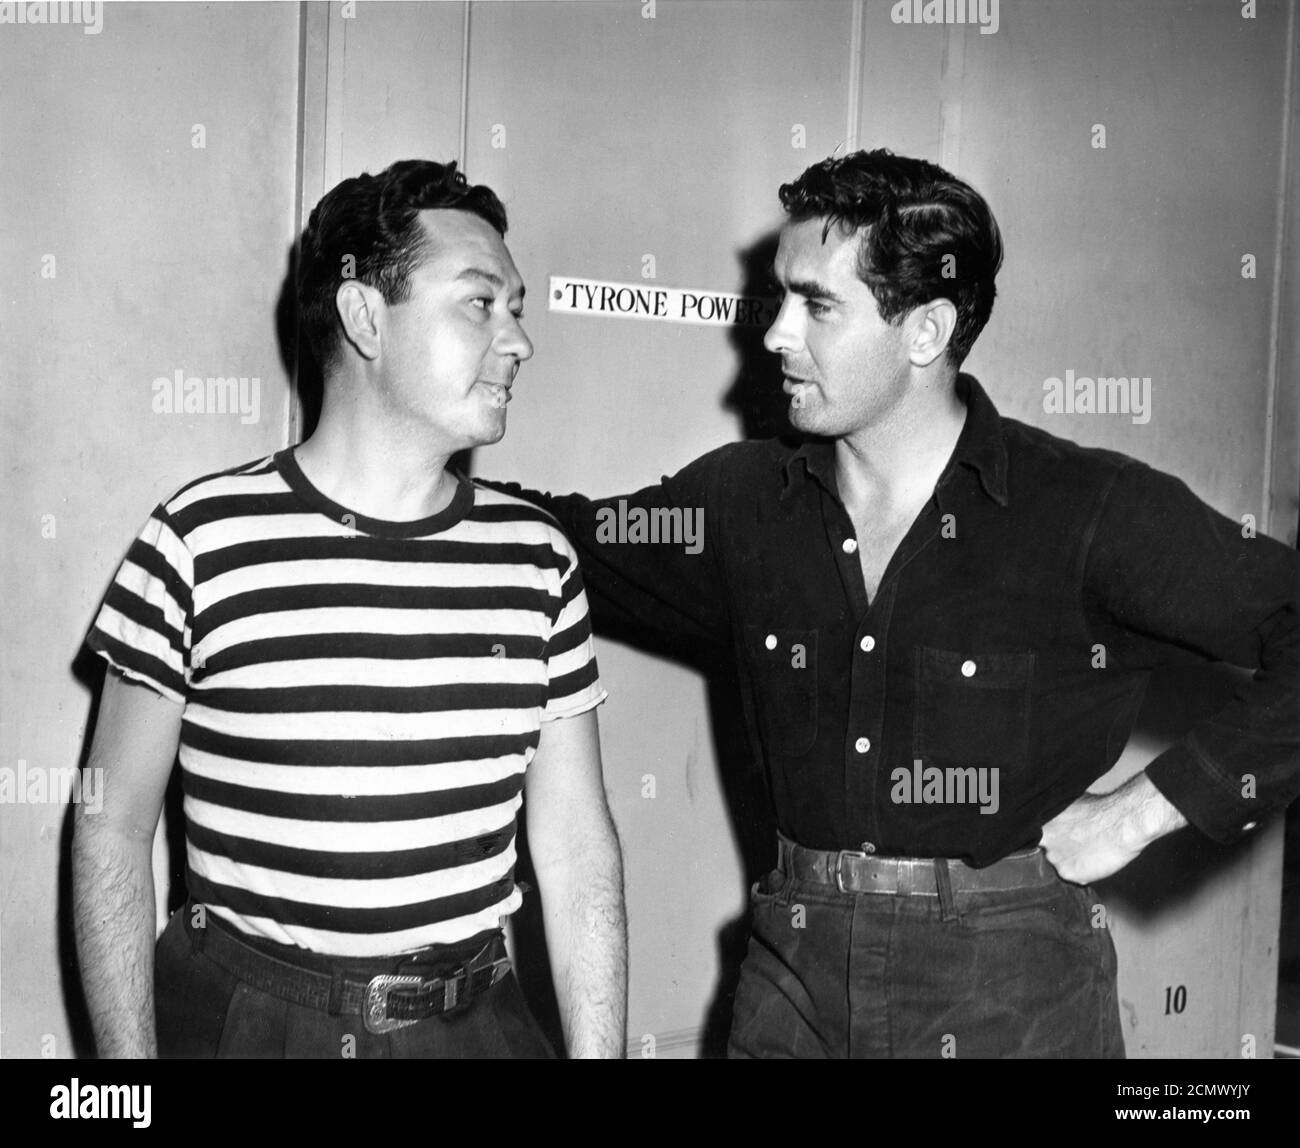 TYRONE POWER outside his Dressing Room with his Stand-In TOMMY NOONAN on set candid during filming of THE RAZOR'S EDGE 1946 director EDMUND GOULDING novel W. Somerset Maugham screenplay Lamar Trotti  music Alfred Newman producer Darryl F. Zanuck Twentieth Century Fox Stock Photo